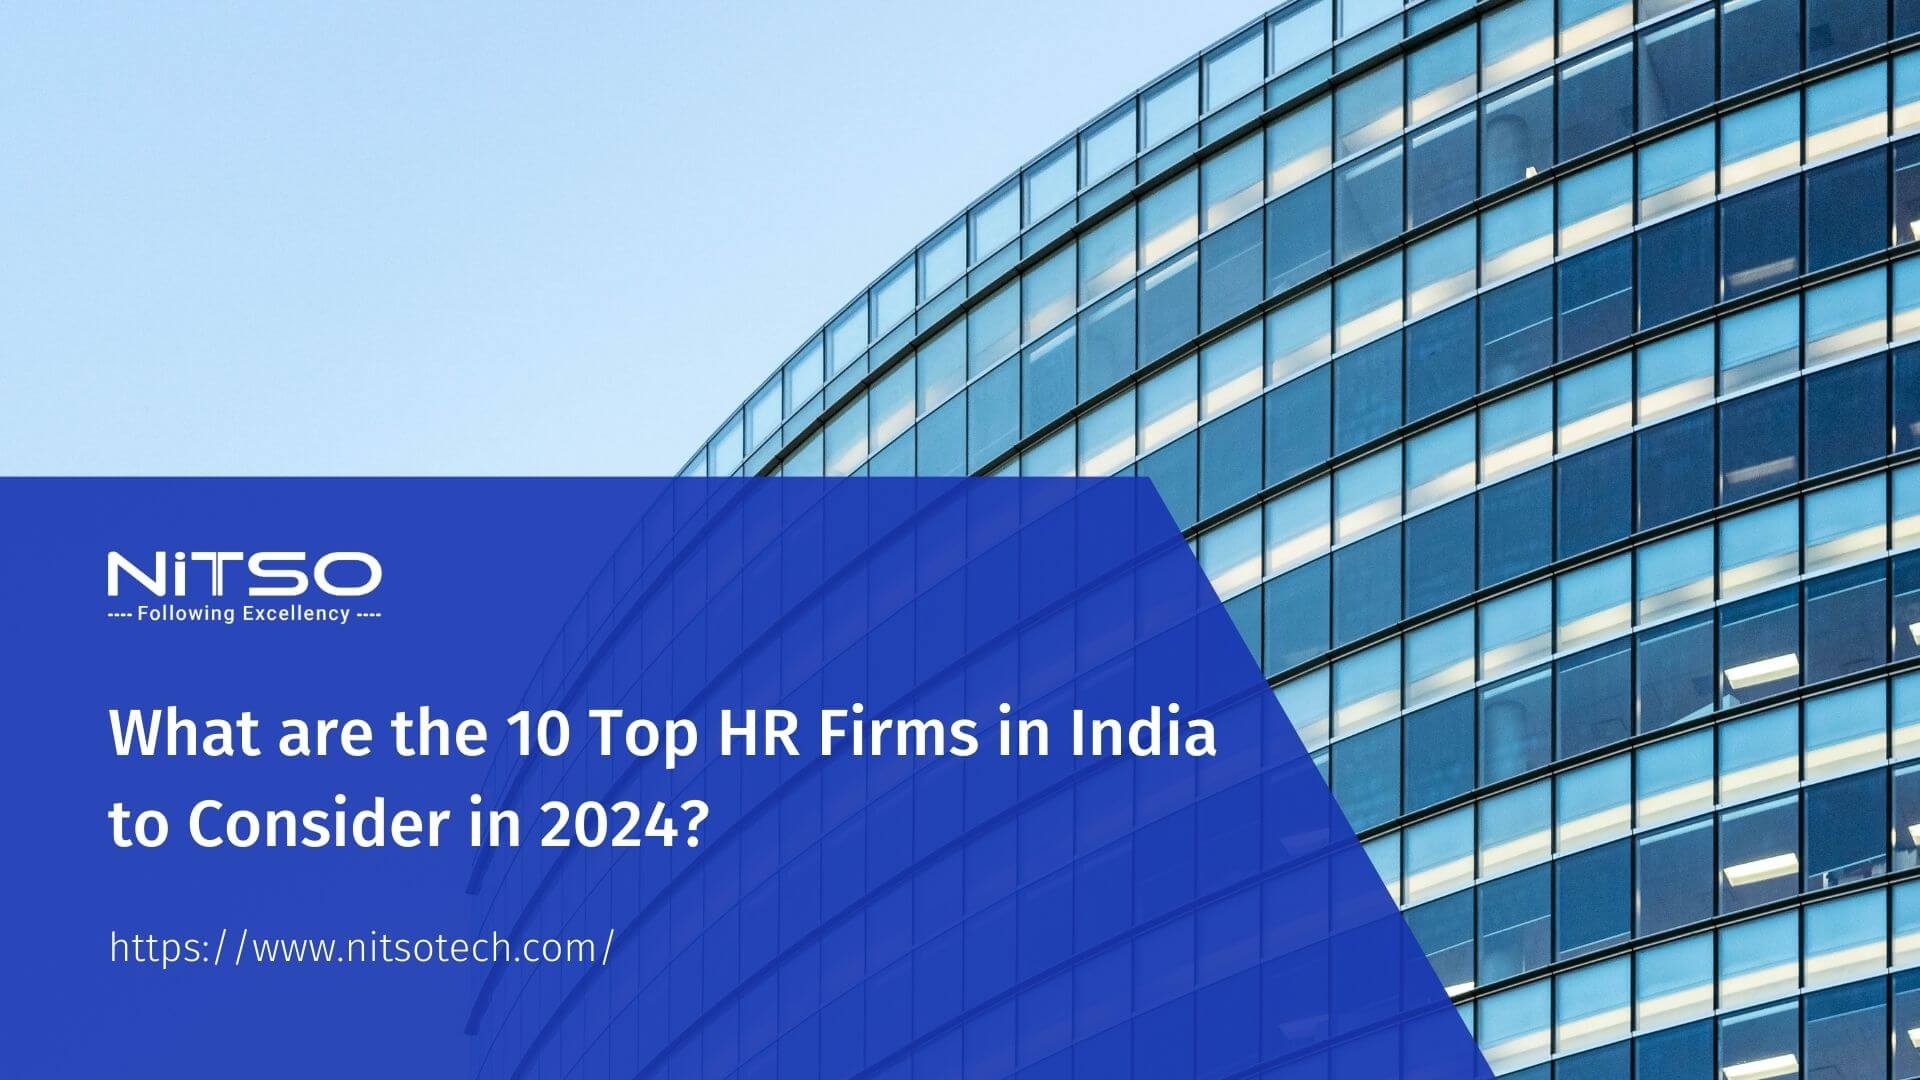 What are the 10 Top HR Firms in India to Consider in 2024